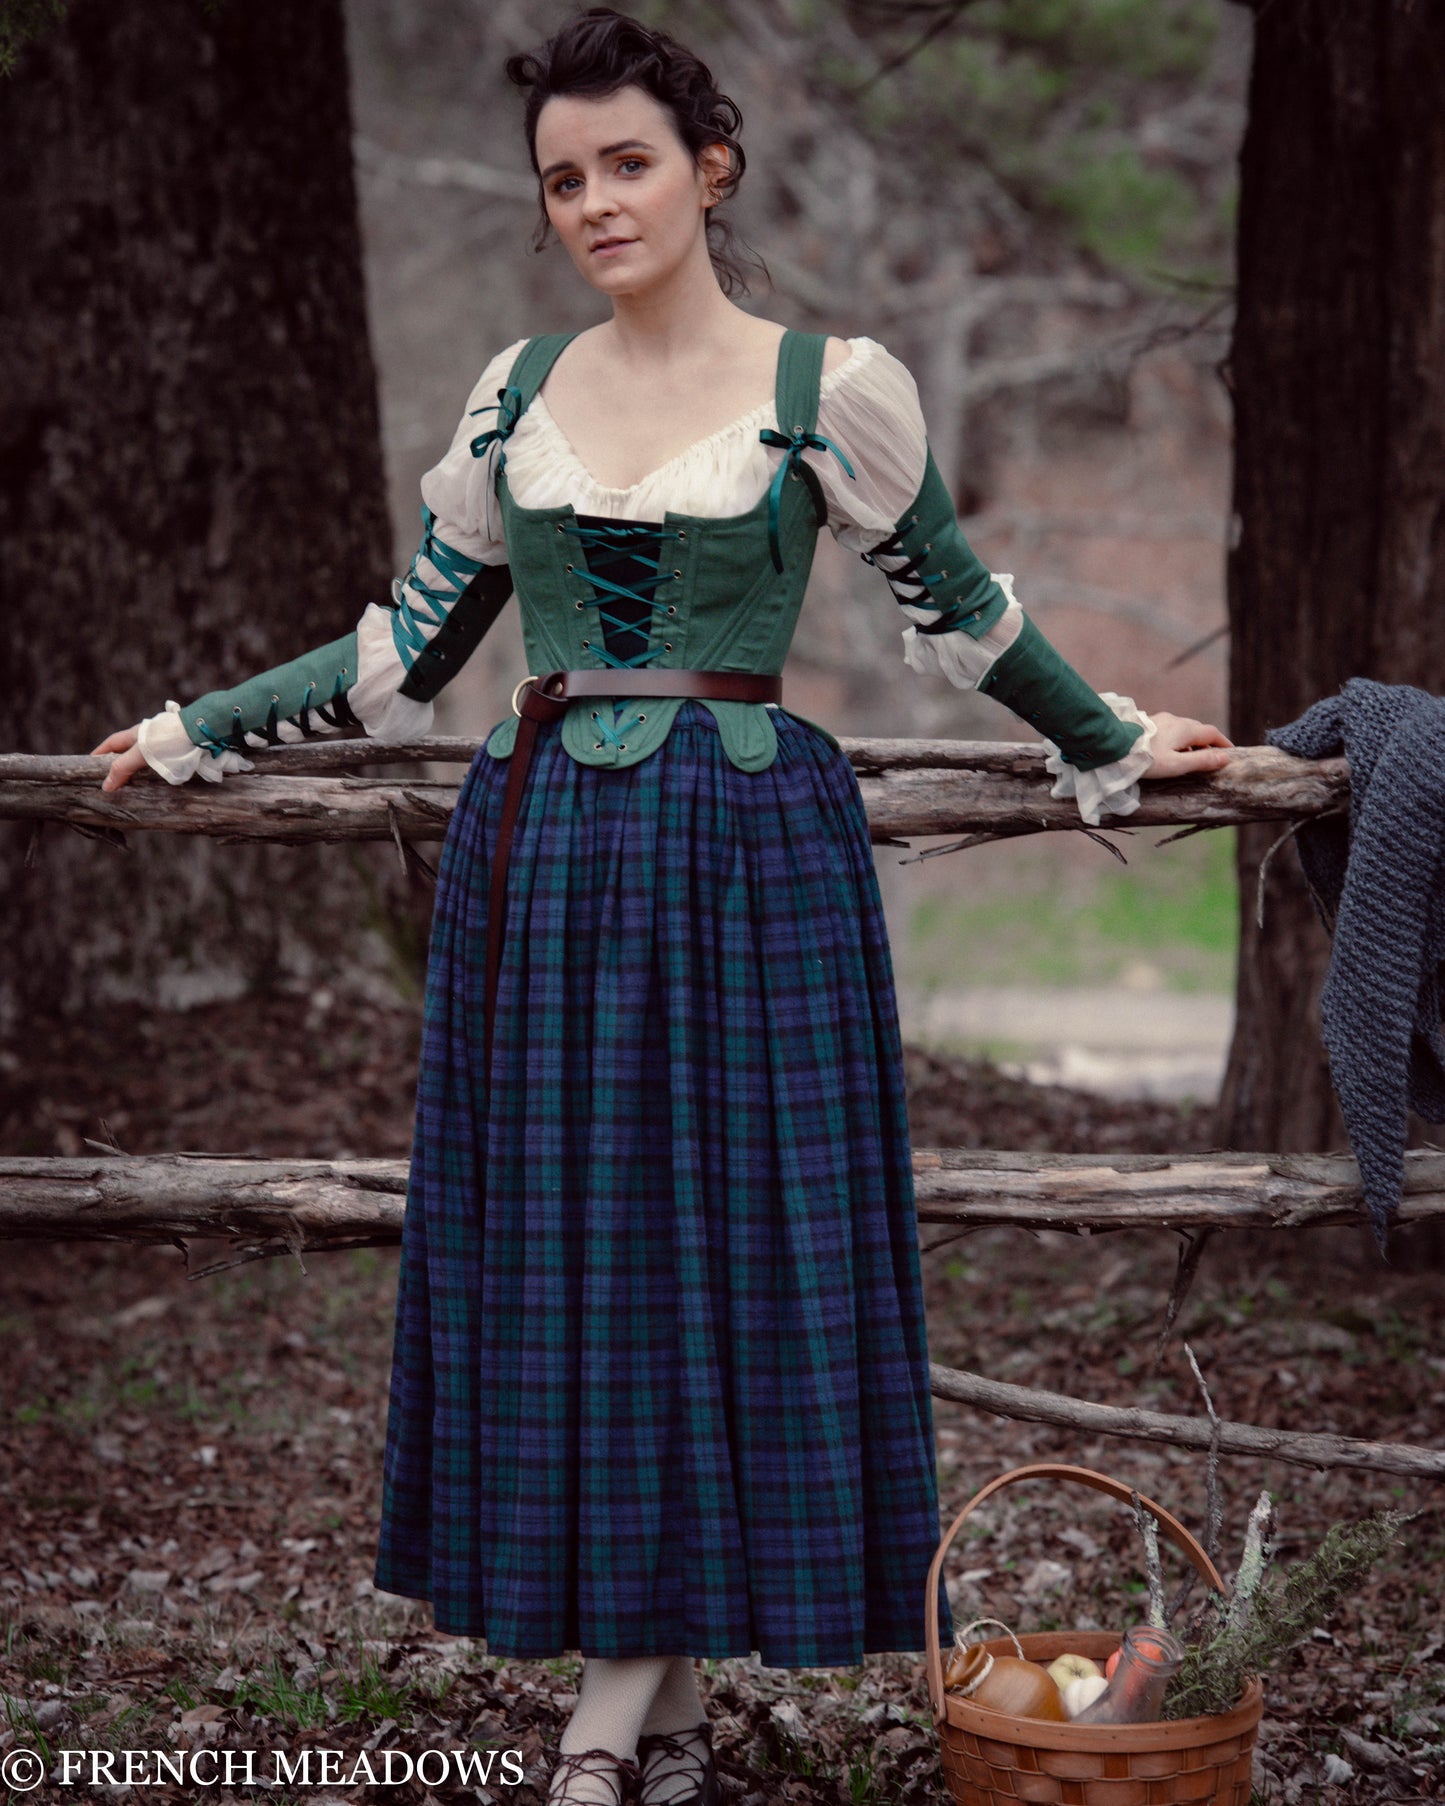 Load image into Gallery viewer, READY TO SHIP Blue and Green Plaid Renaissance Skirt
